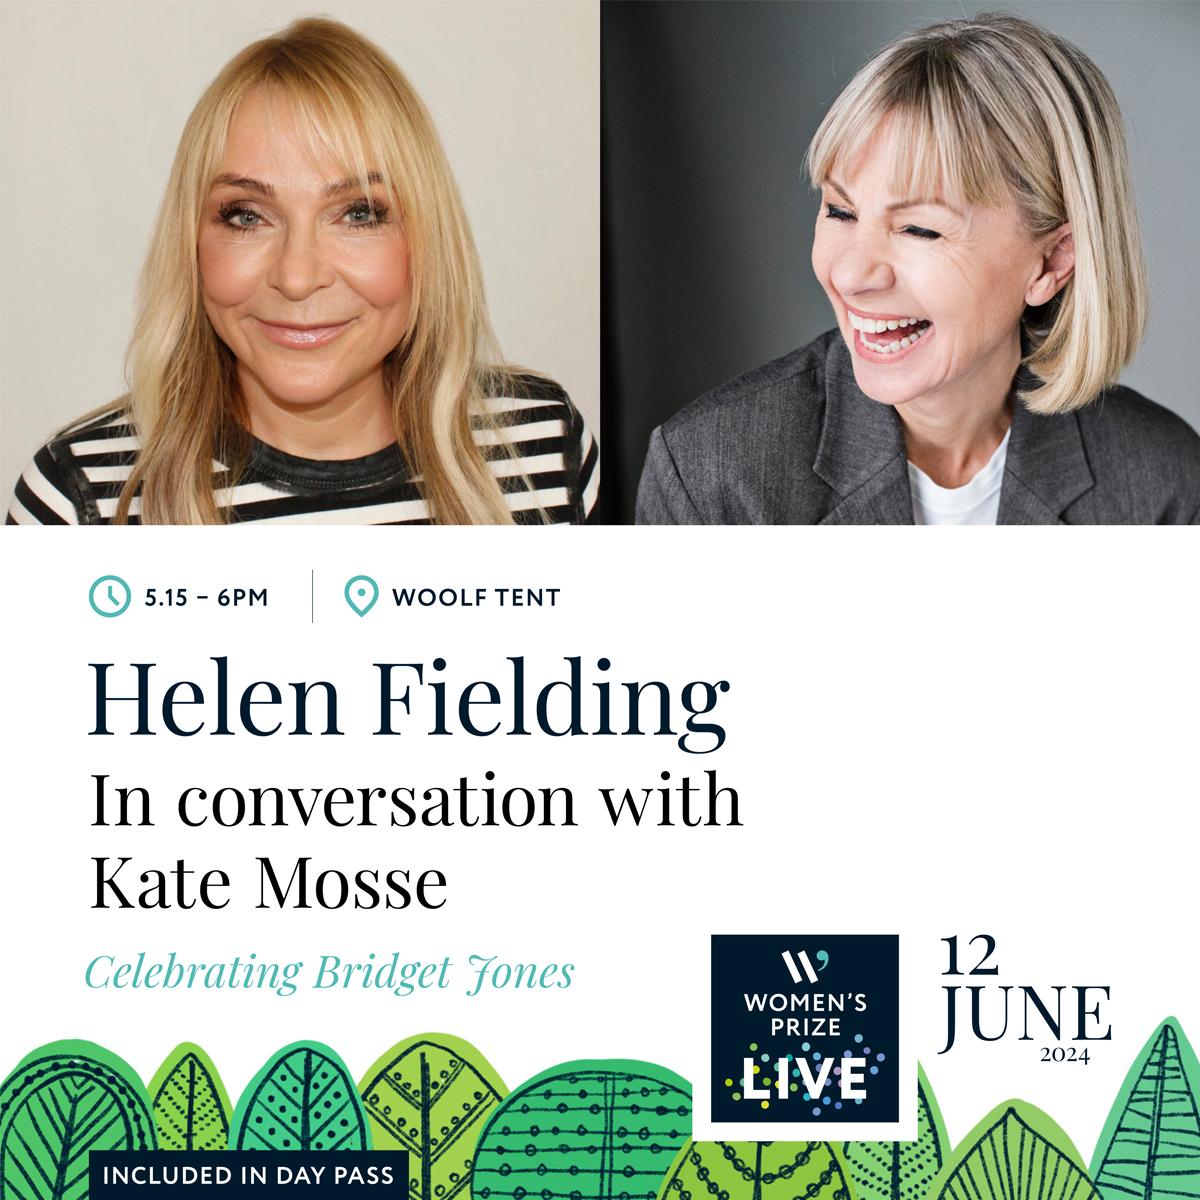 Our latest headliner at the #WomensPrize LIVE festival has taken us to the edge of reason until we were mad about the boy... Award-winning novelist and screenwriter Helen Fielding will be in conversation with Kate Mosse celebrating the iconic #BridgetJones bit.ly/WPLIVE24